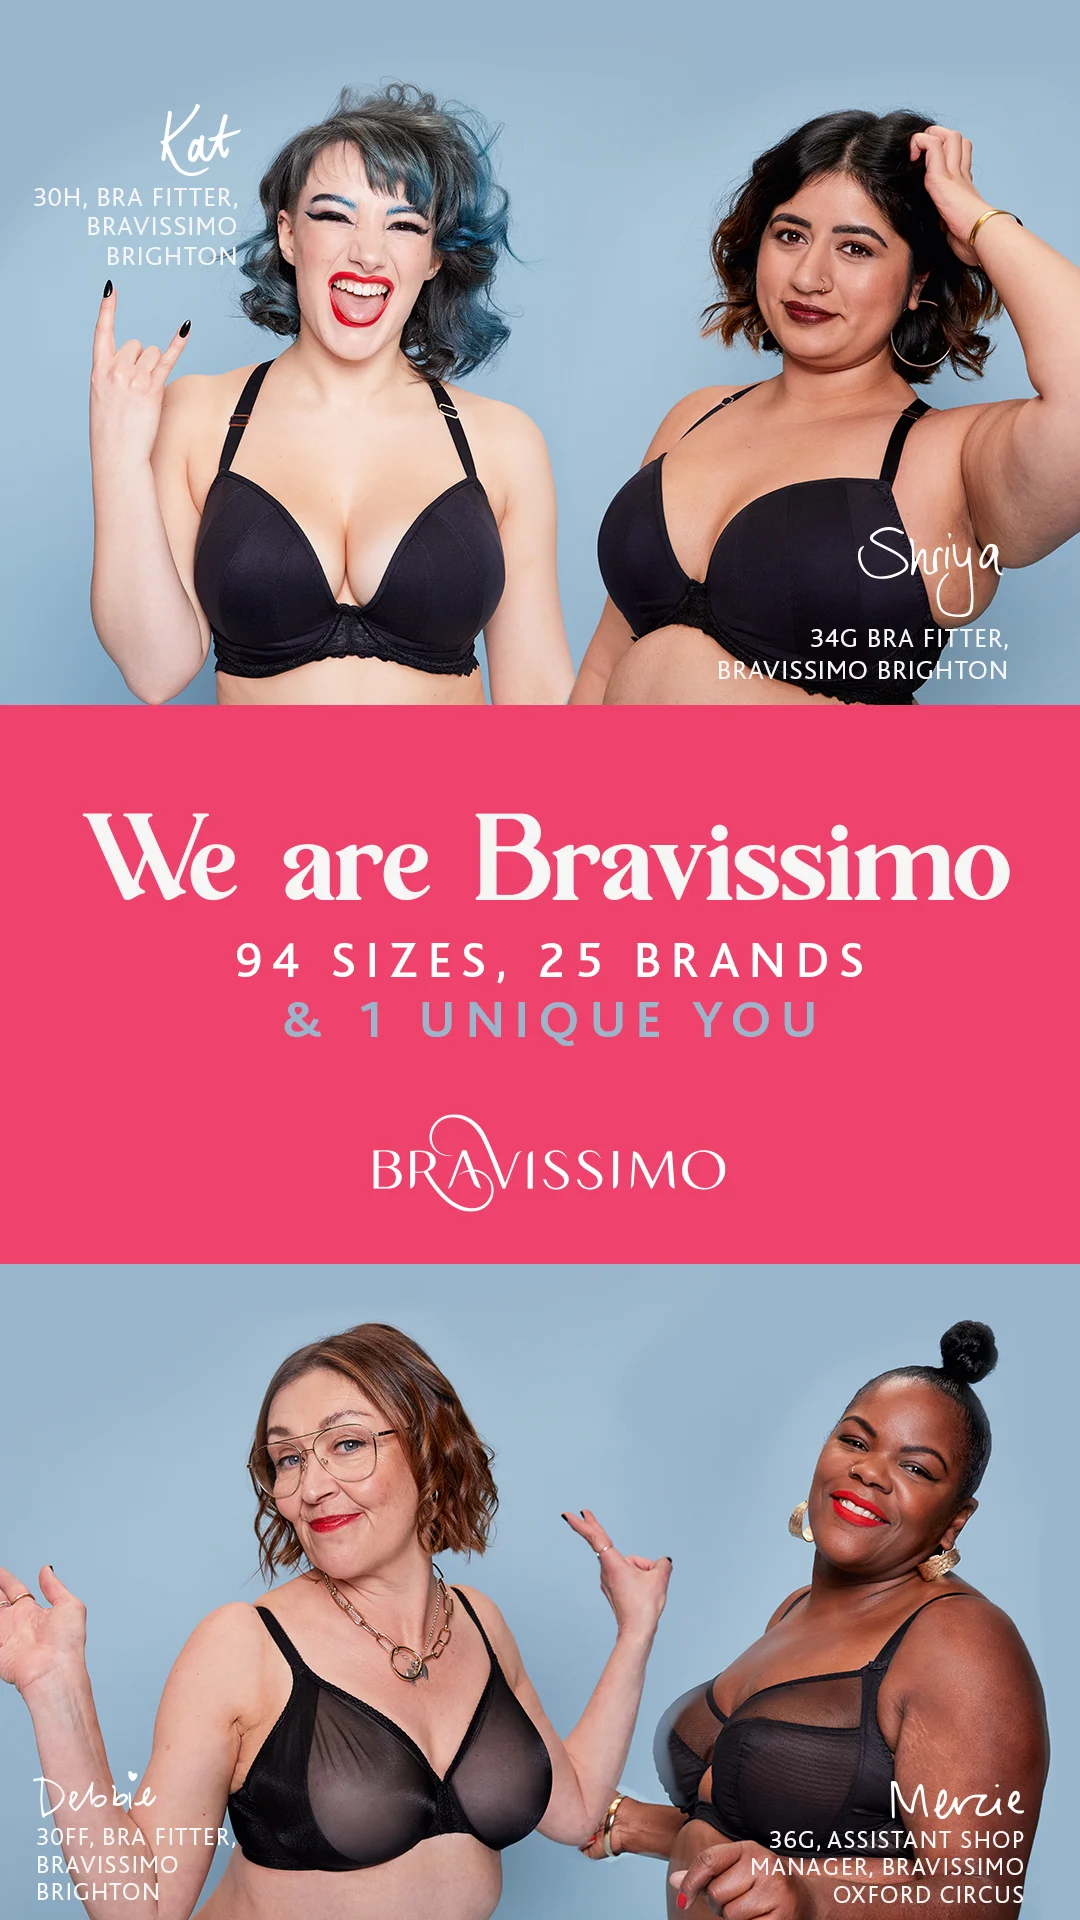 5 ways to get fitted for a bra with Bravissimo on Vimeo